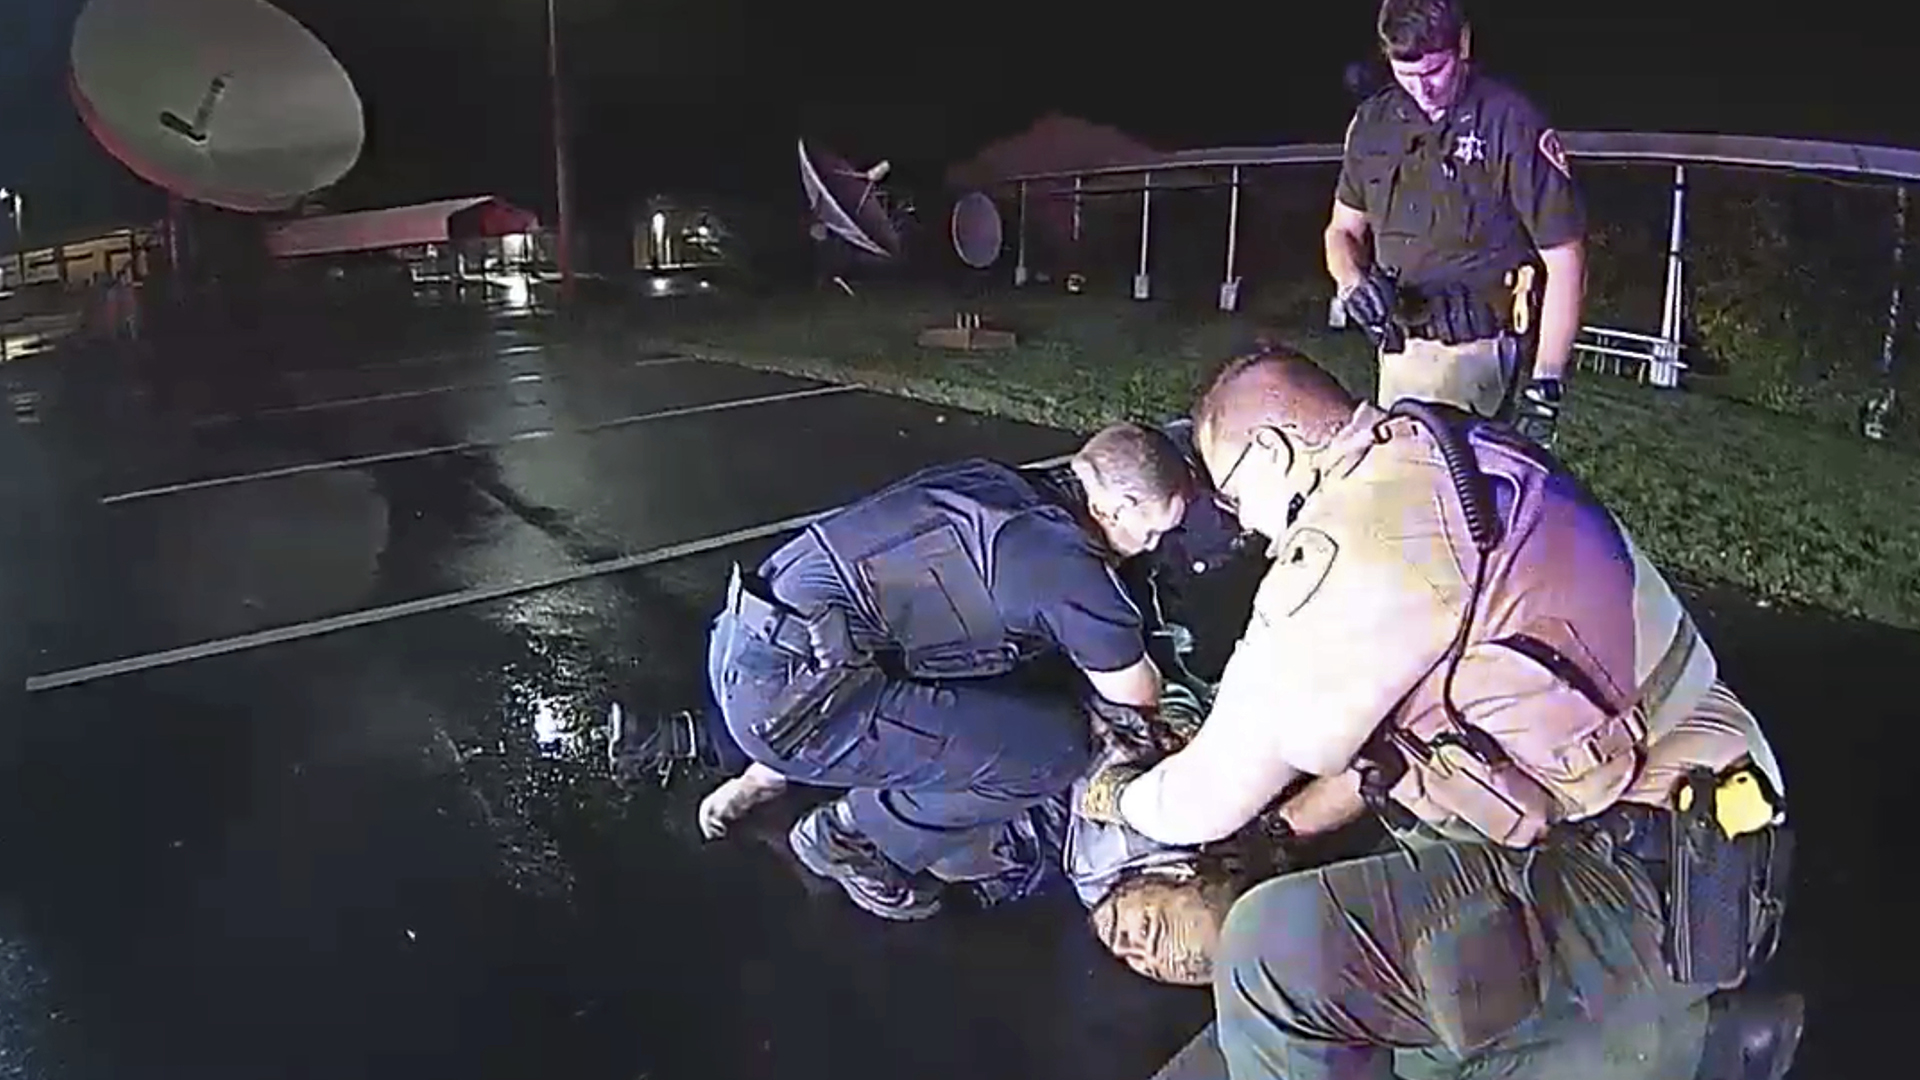 Two police officers kneel while holding Demetrio Jackson to the ground in a parking lot while another police officer stands behind them, with satellite dishes and buildings in the background under a night sky.